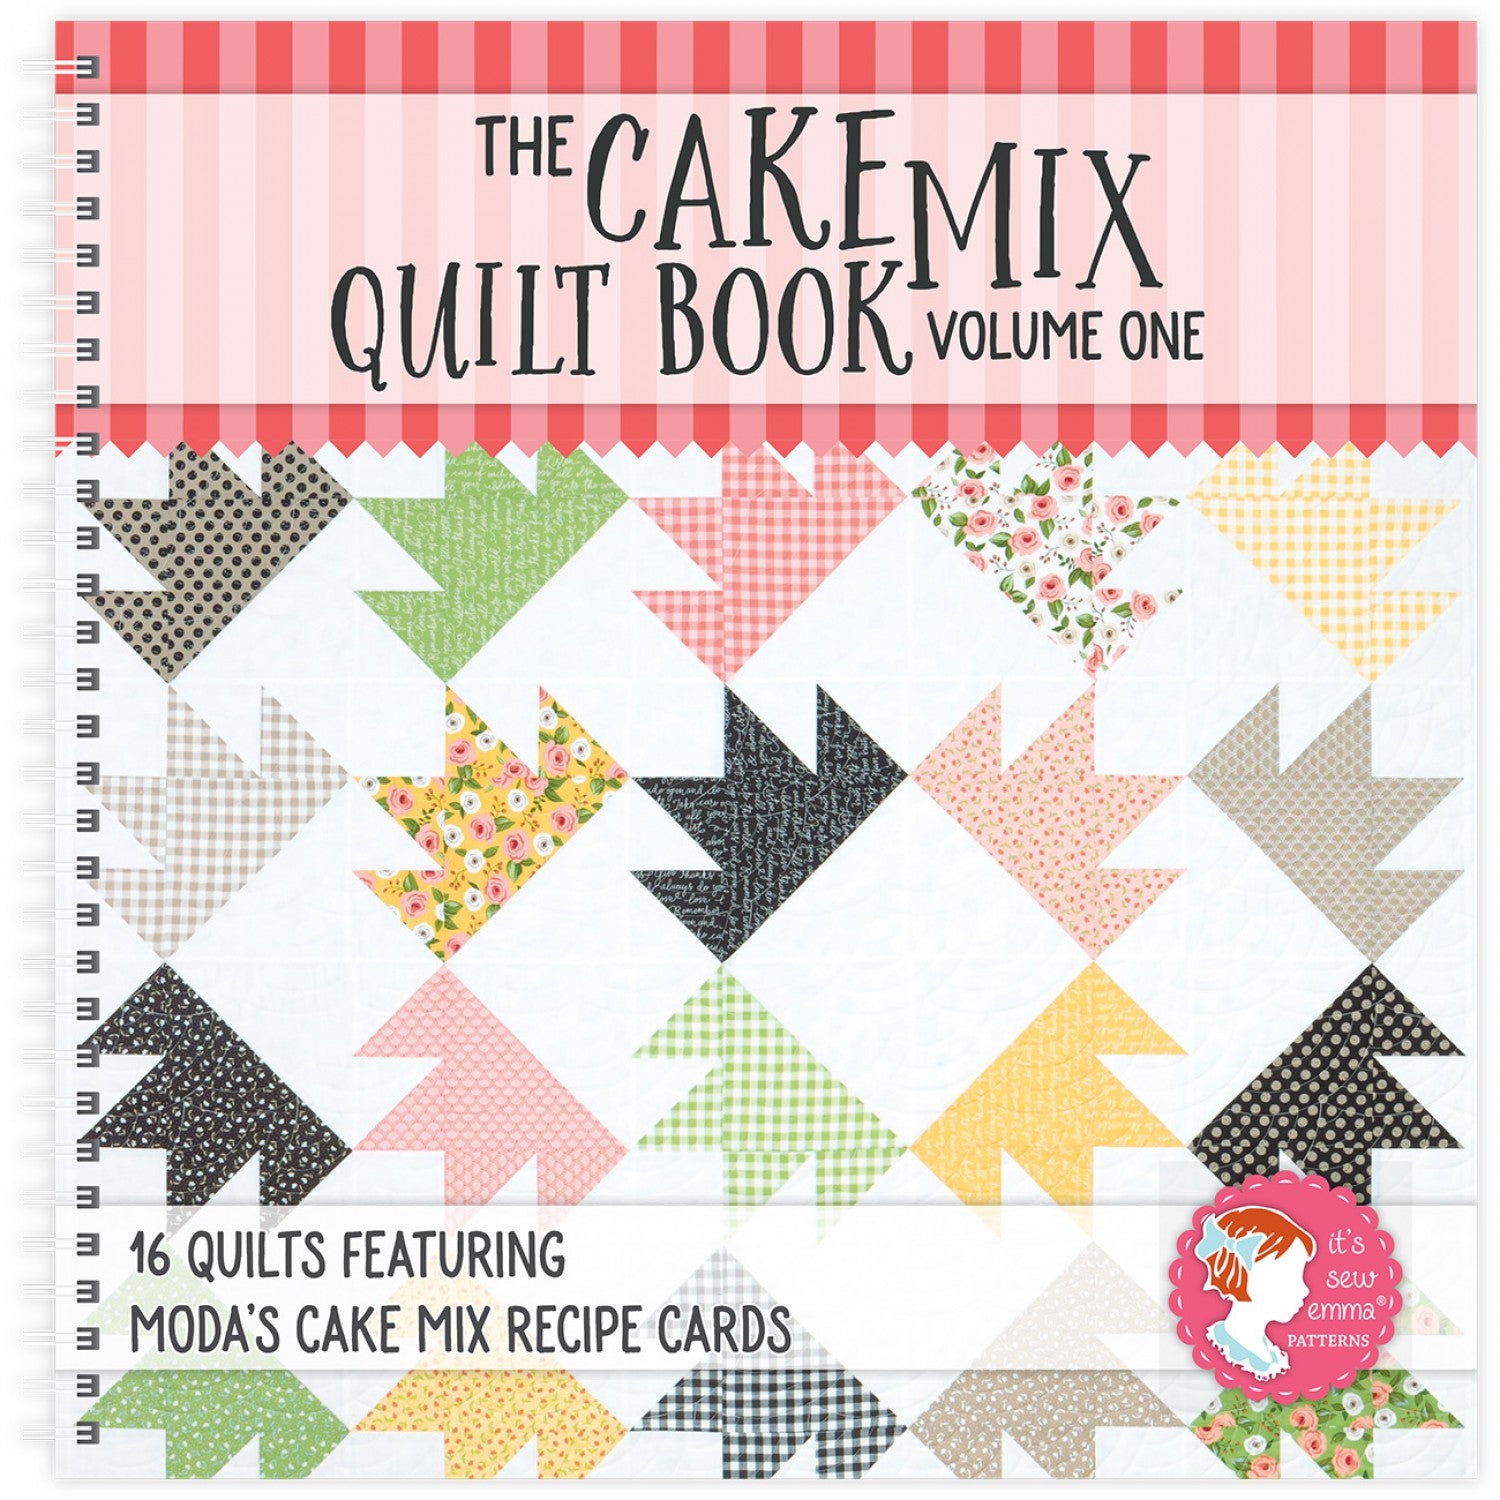 Cake Mix Quilt Book Volume 1 - ISE-920 - It's Sew Emma